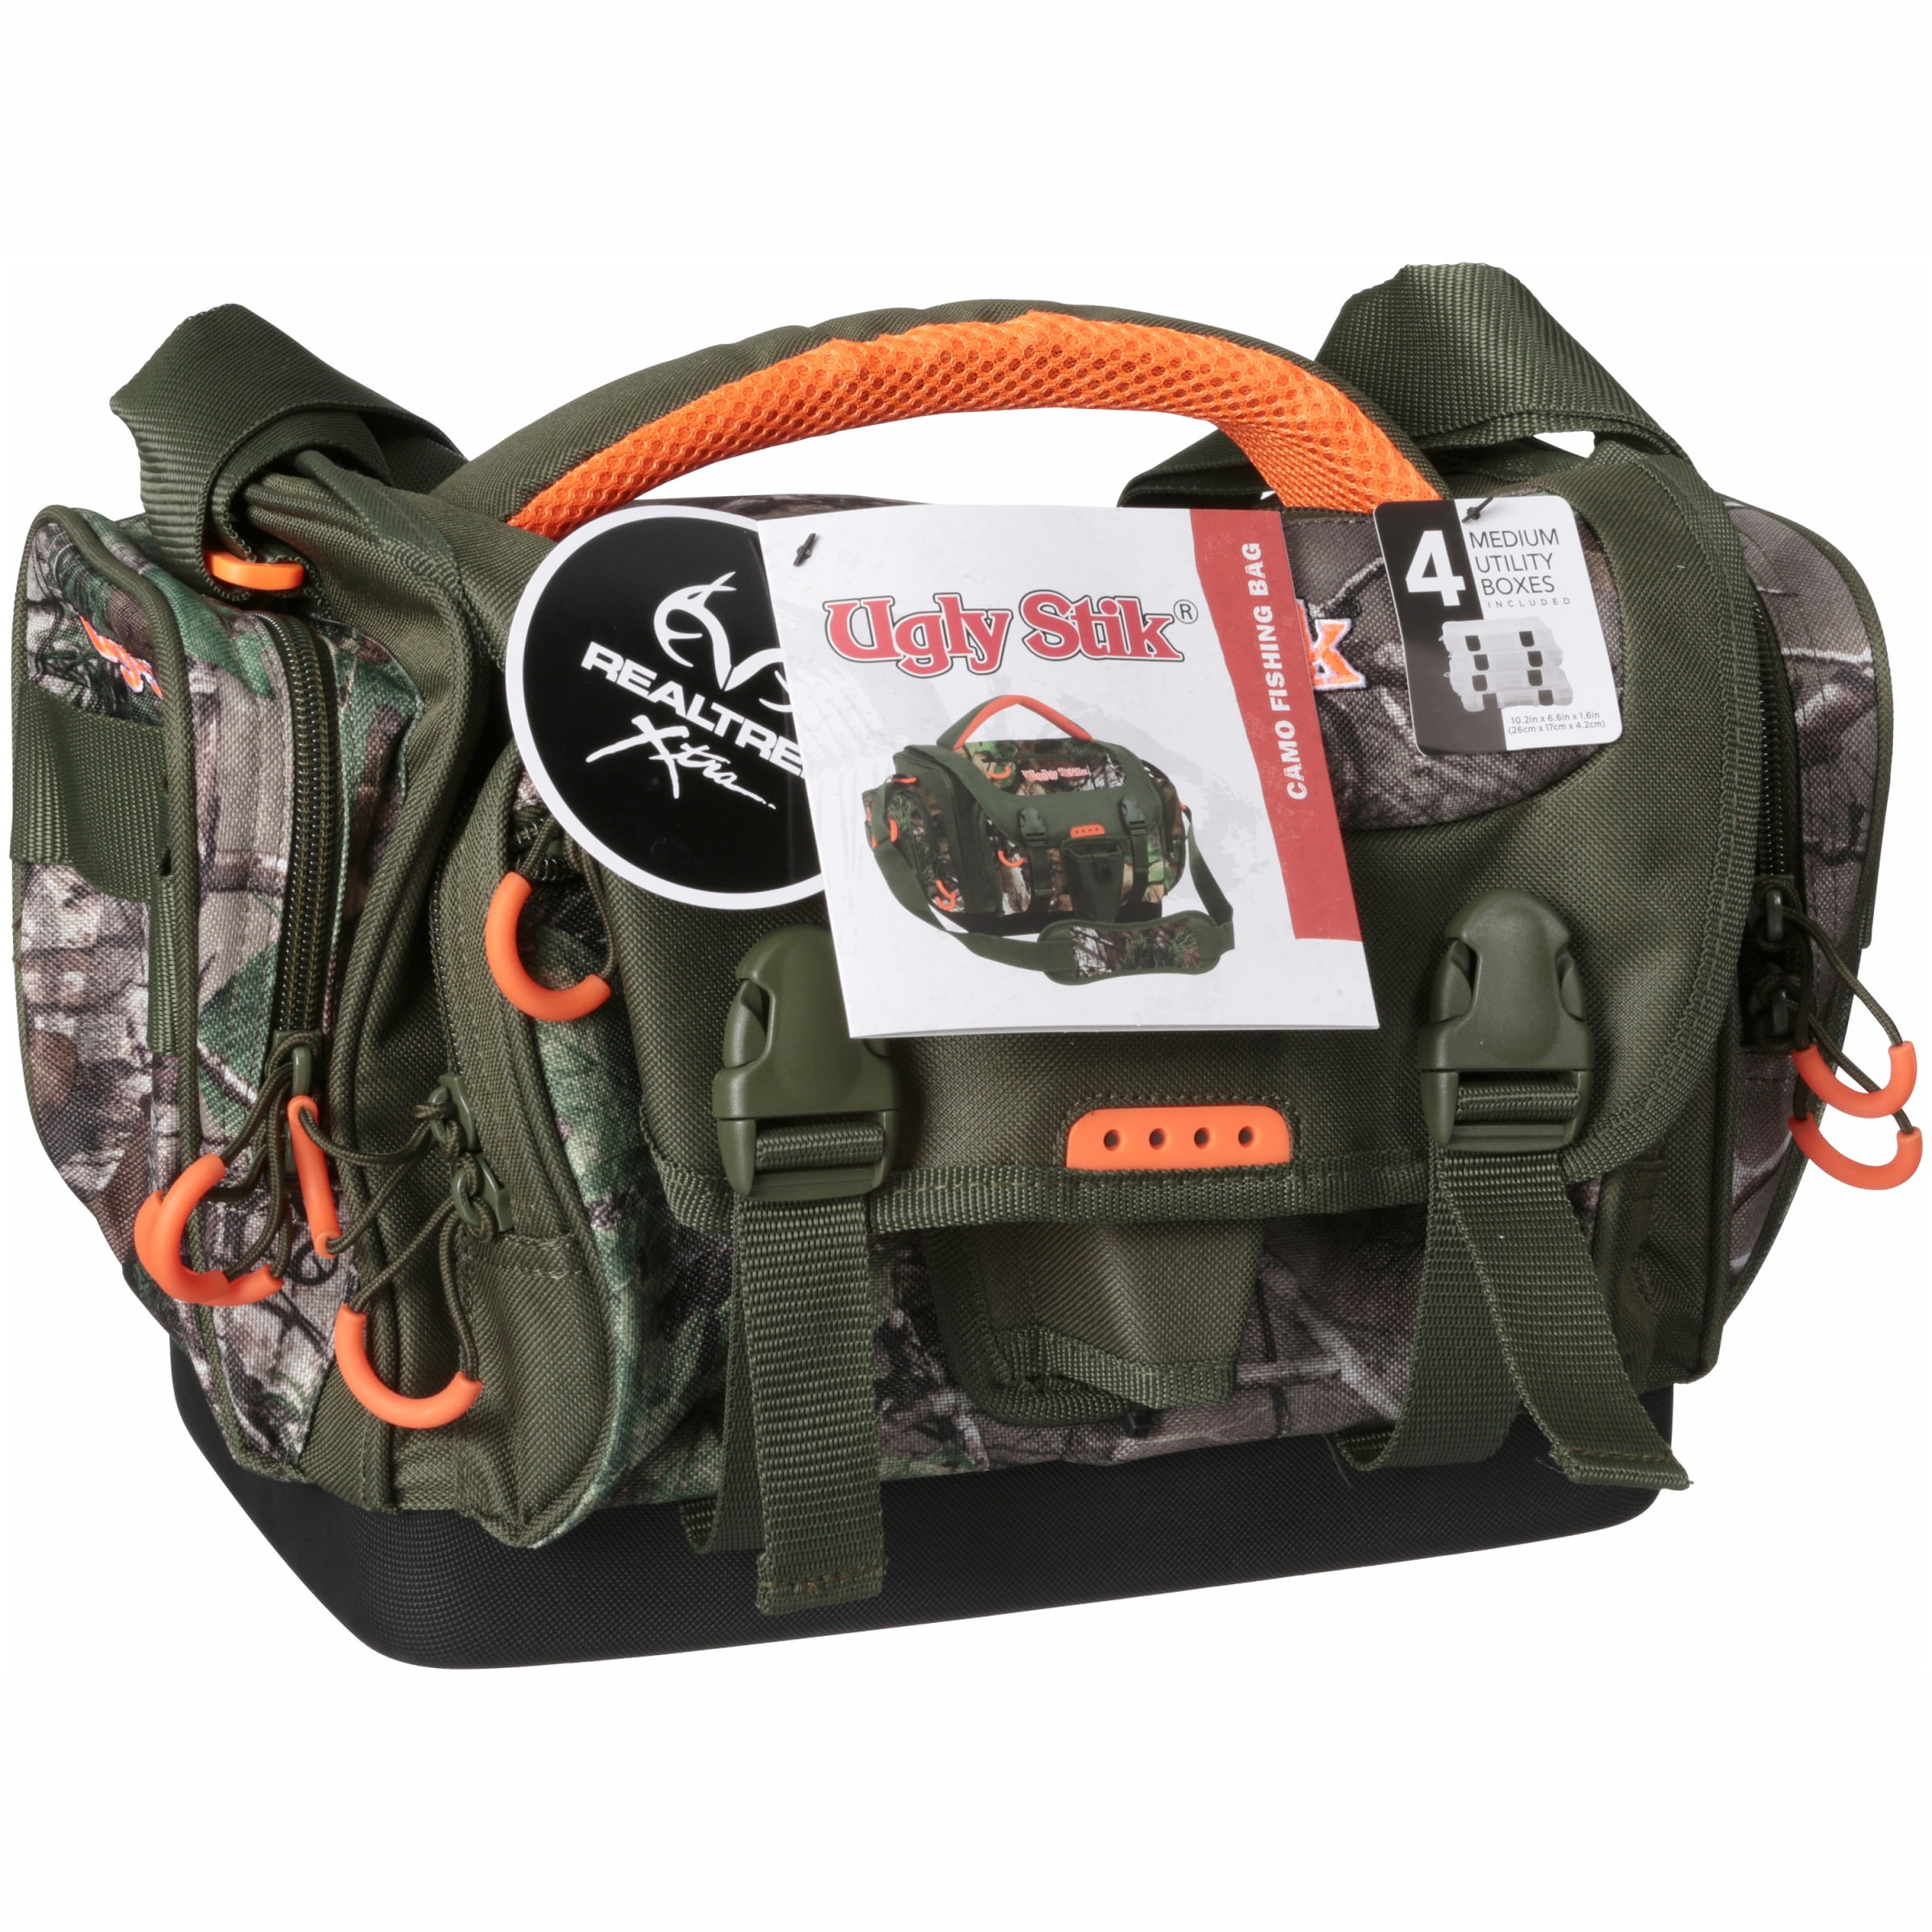 Ugly Stik Fishing Tackle Bag with Four Medium Lure Box Storage, Realtree  Camo, Polyester